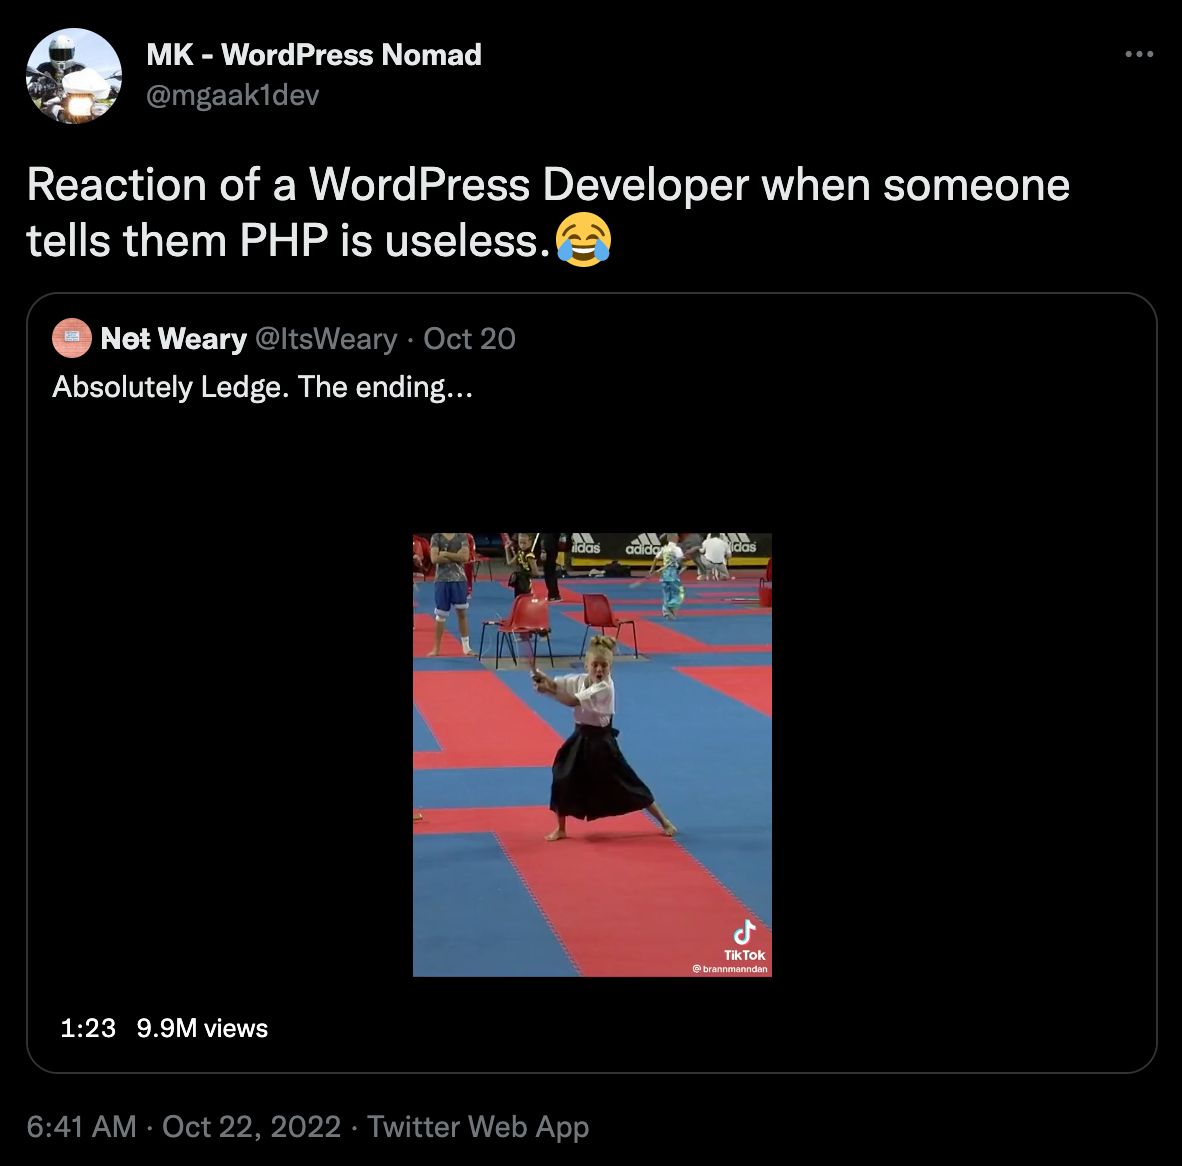 Tweet from @mgaak1dev that reads "Reaction of a WordPress Developer when someone tells them PHP is useless.😂" that displays a young child with a sword engaged in a martial arts demonstration as if to insinuate the WordPress developer in question will fight you.